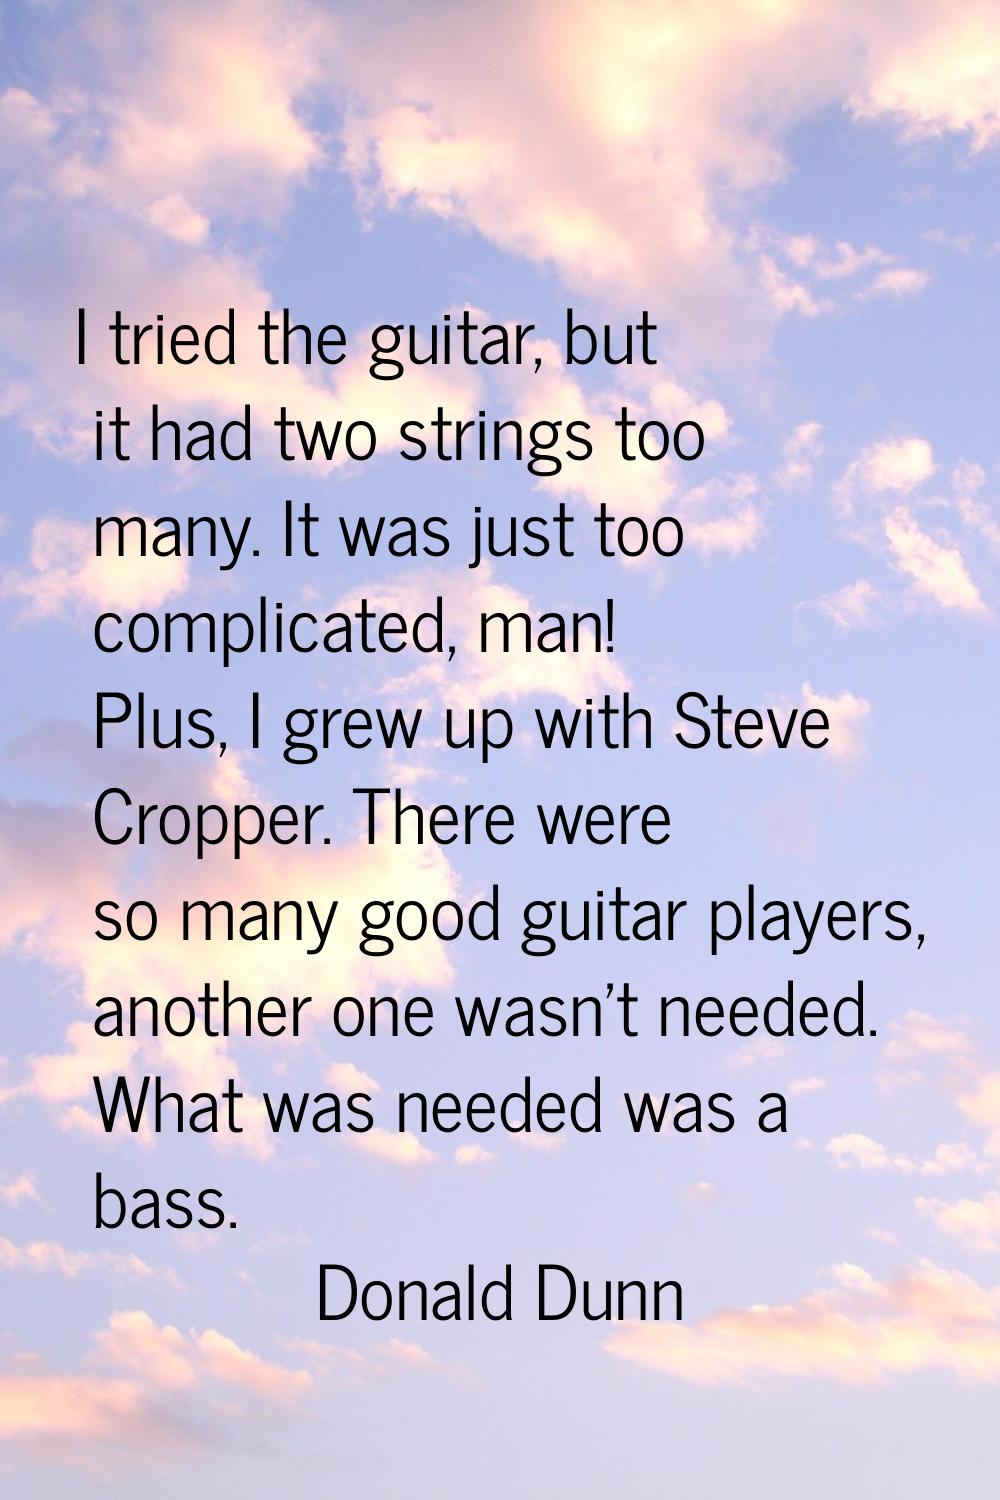 I tried the guitar, but it had two strings too many. It was just too complicated, man! Plus, I grew